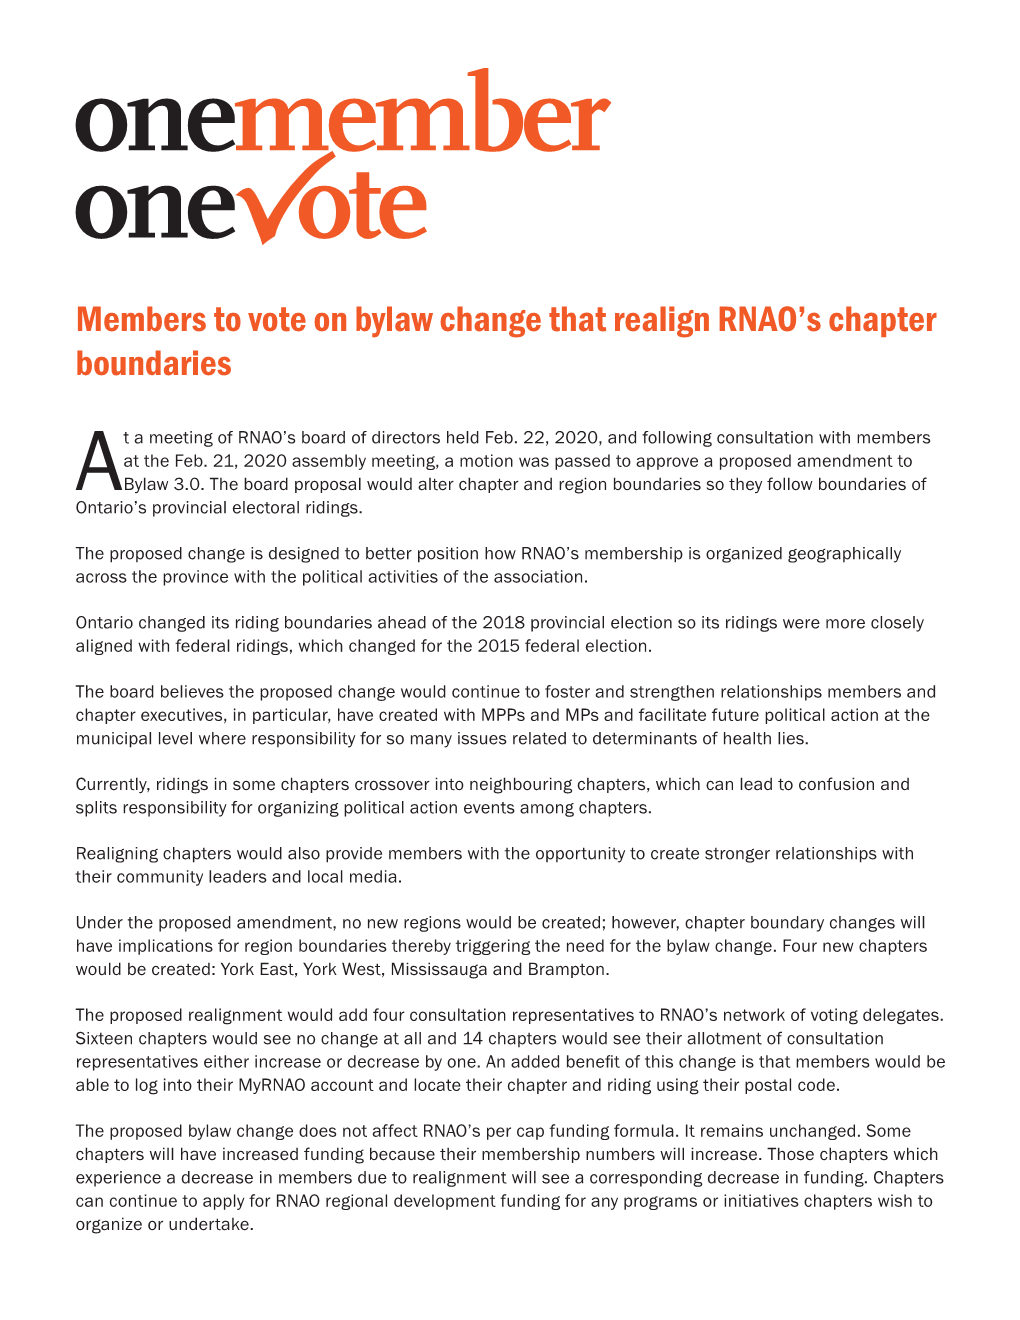 Members to Vote on Bylaw Change That Realign RNAO's Chapter Boundaries